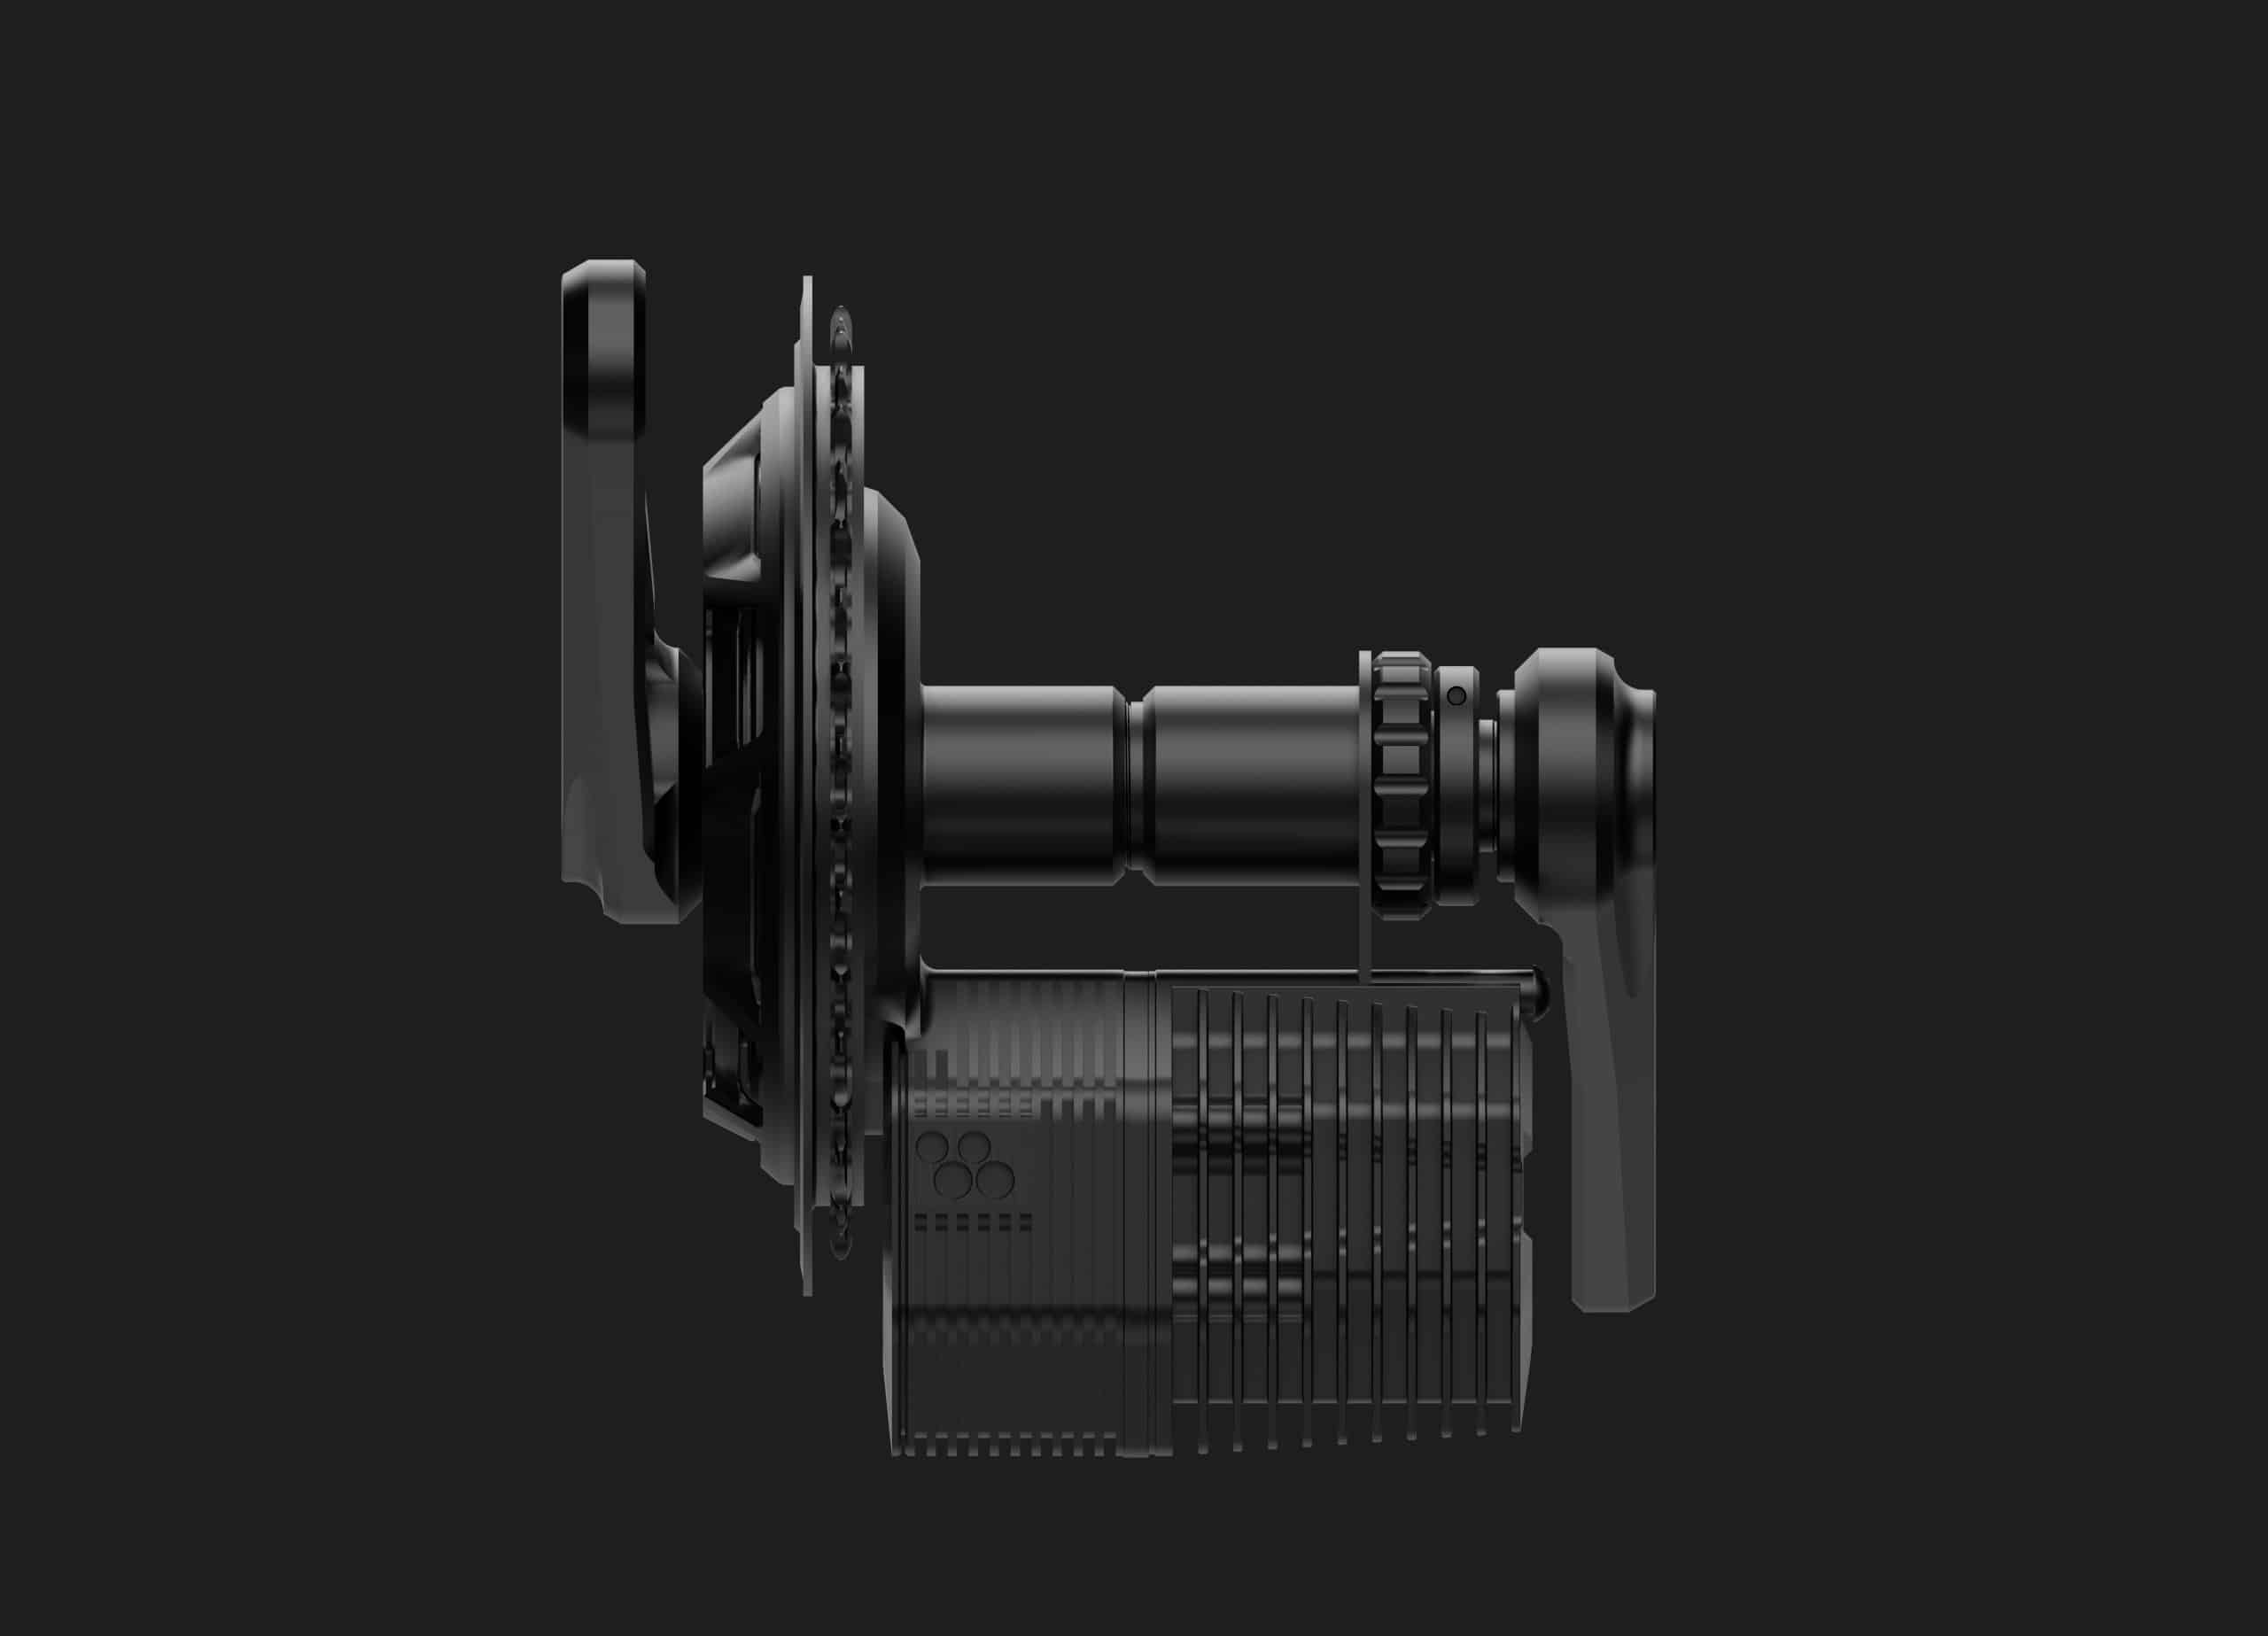 A black camera with a black background